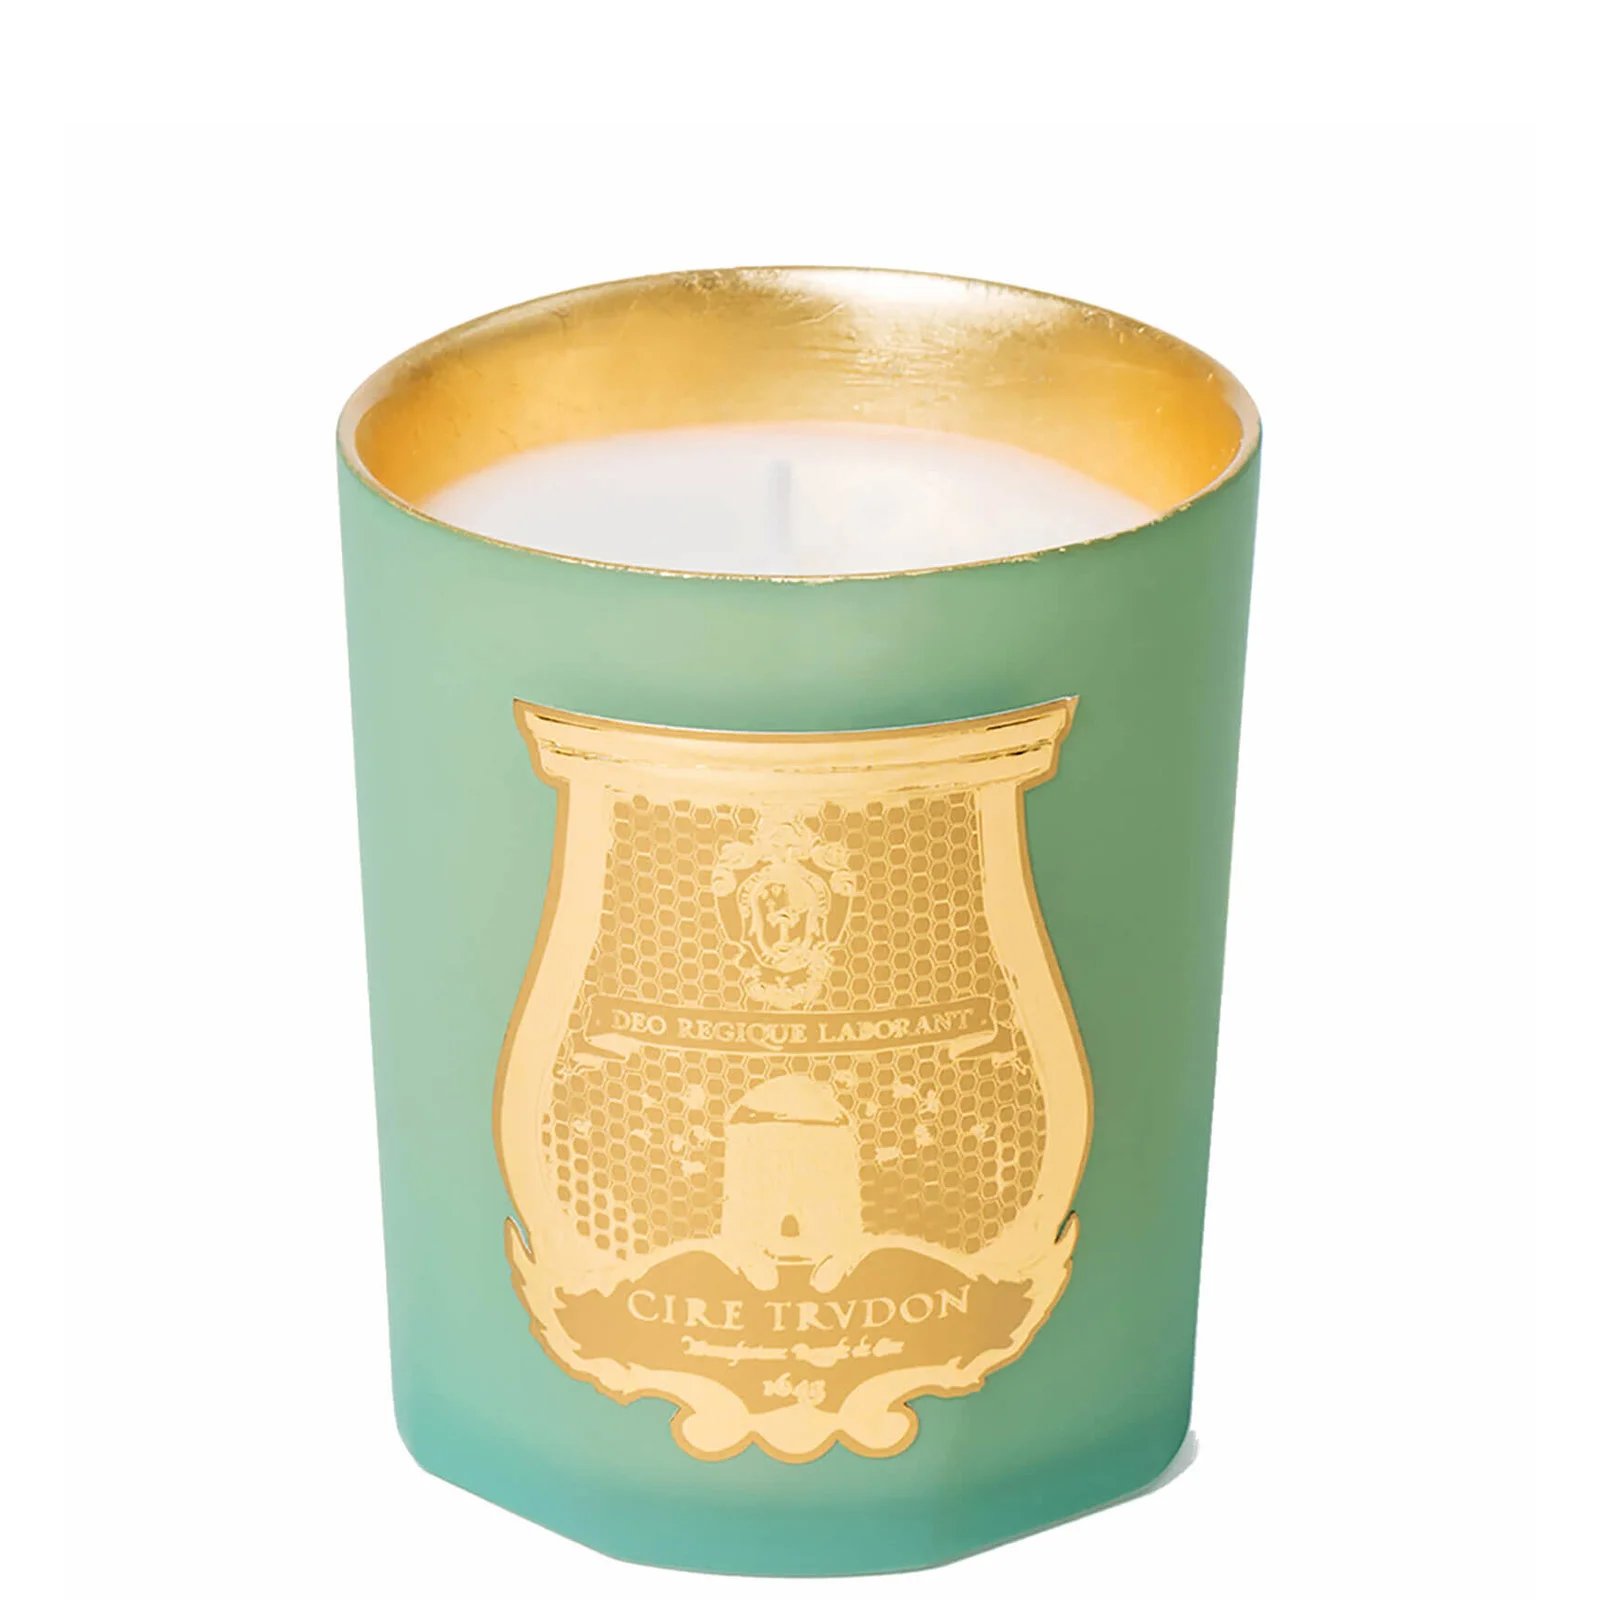 Cire Trudon Gizeh Candle - 270g Image 1